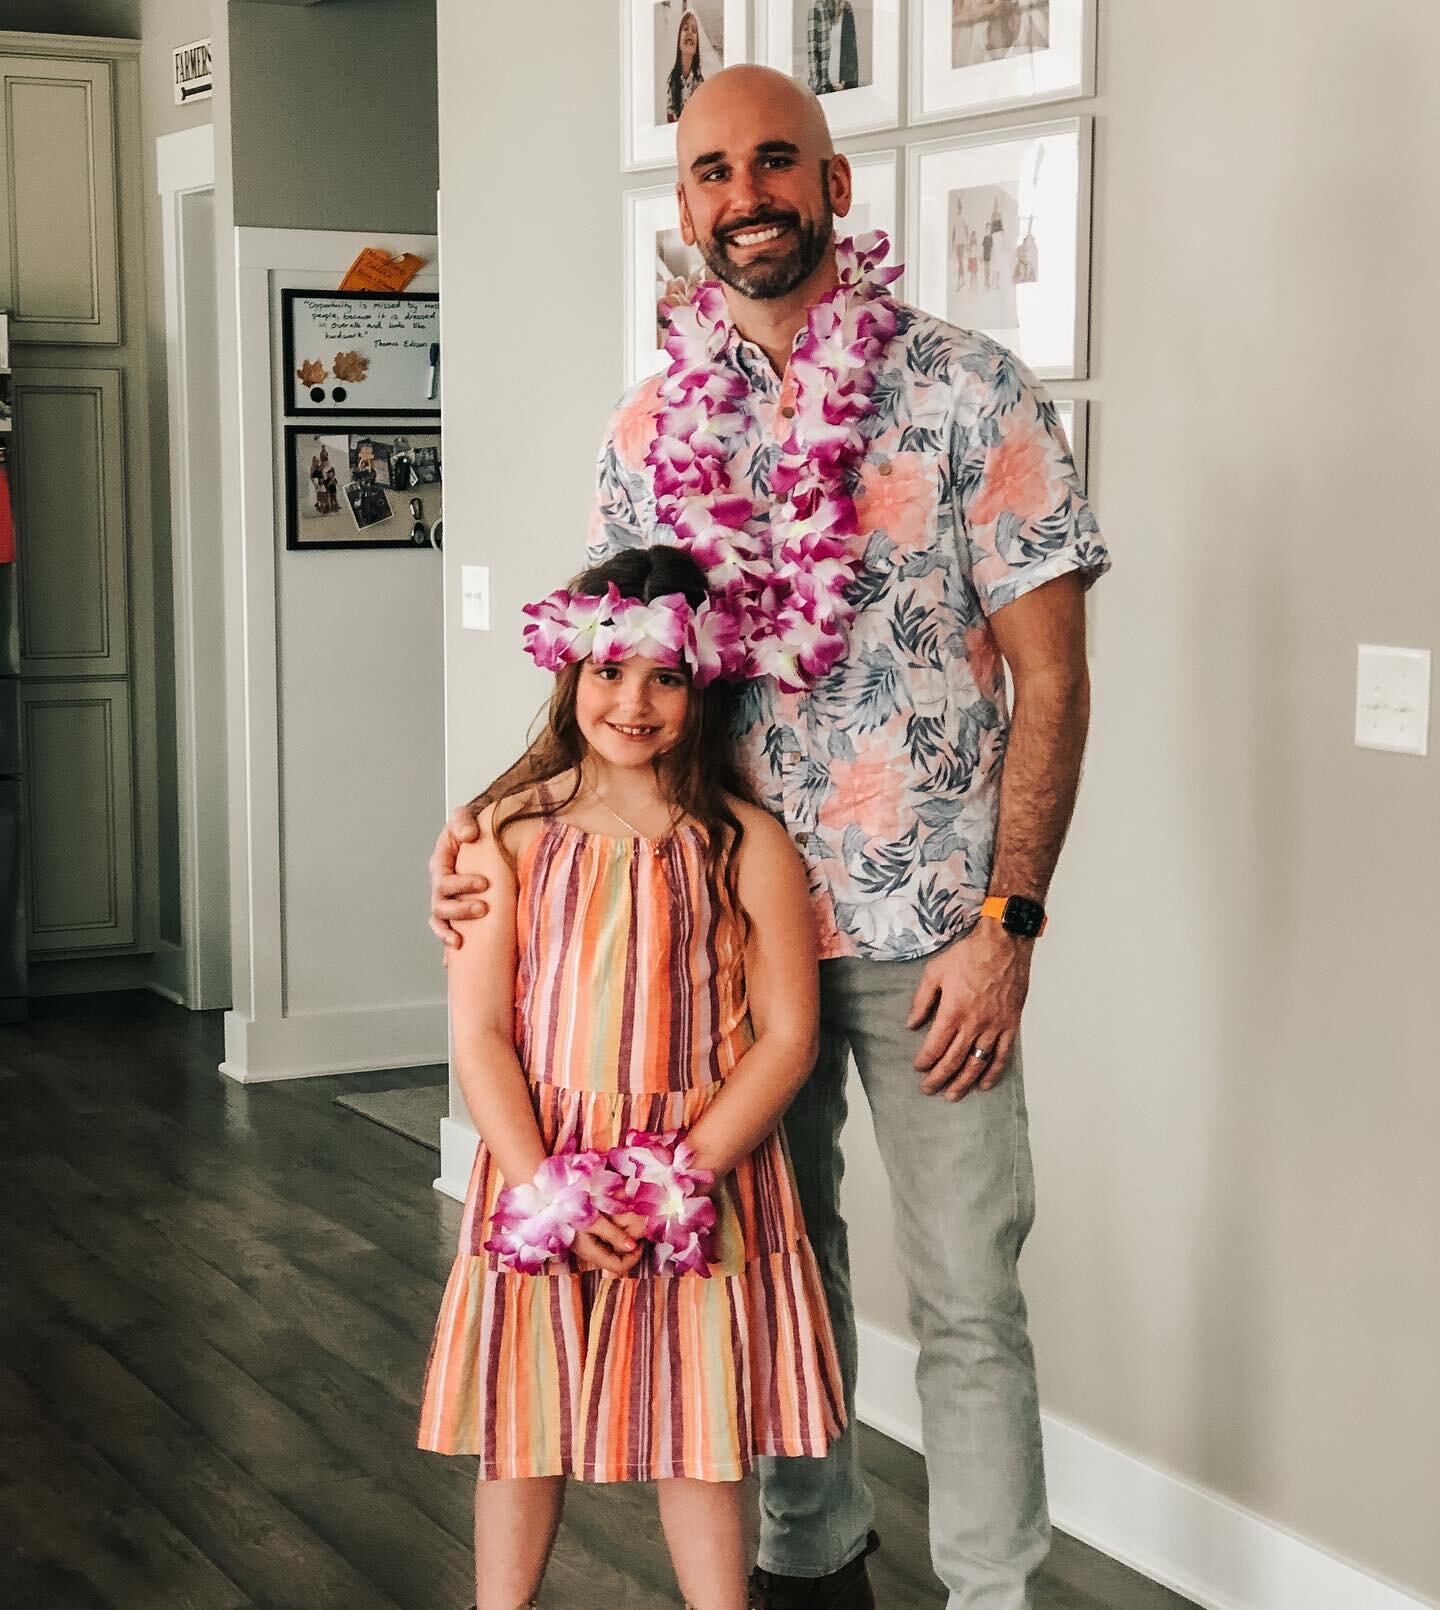 Daddy daughter luau dance for Charlie and Sloane tonight. 💕 I hope that in these moments with him she's learning what I noticed in our first few dates&hellip;she deserves to have doors opened for her, uninterrupted conversation, to walk on the insid